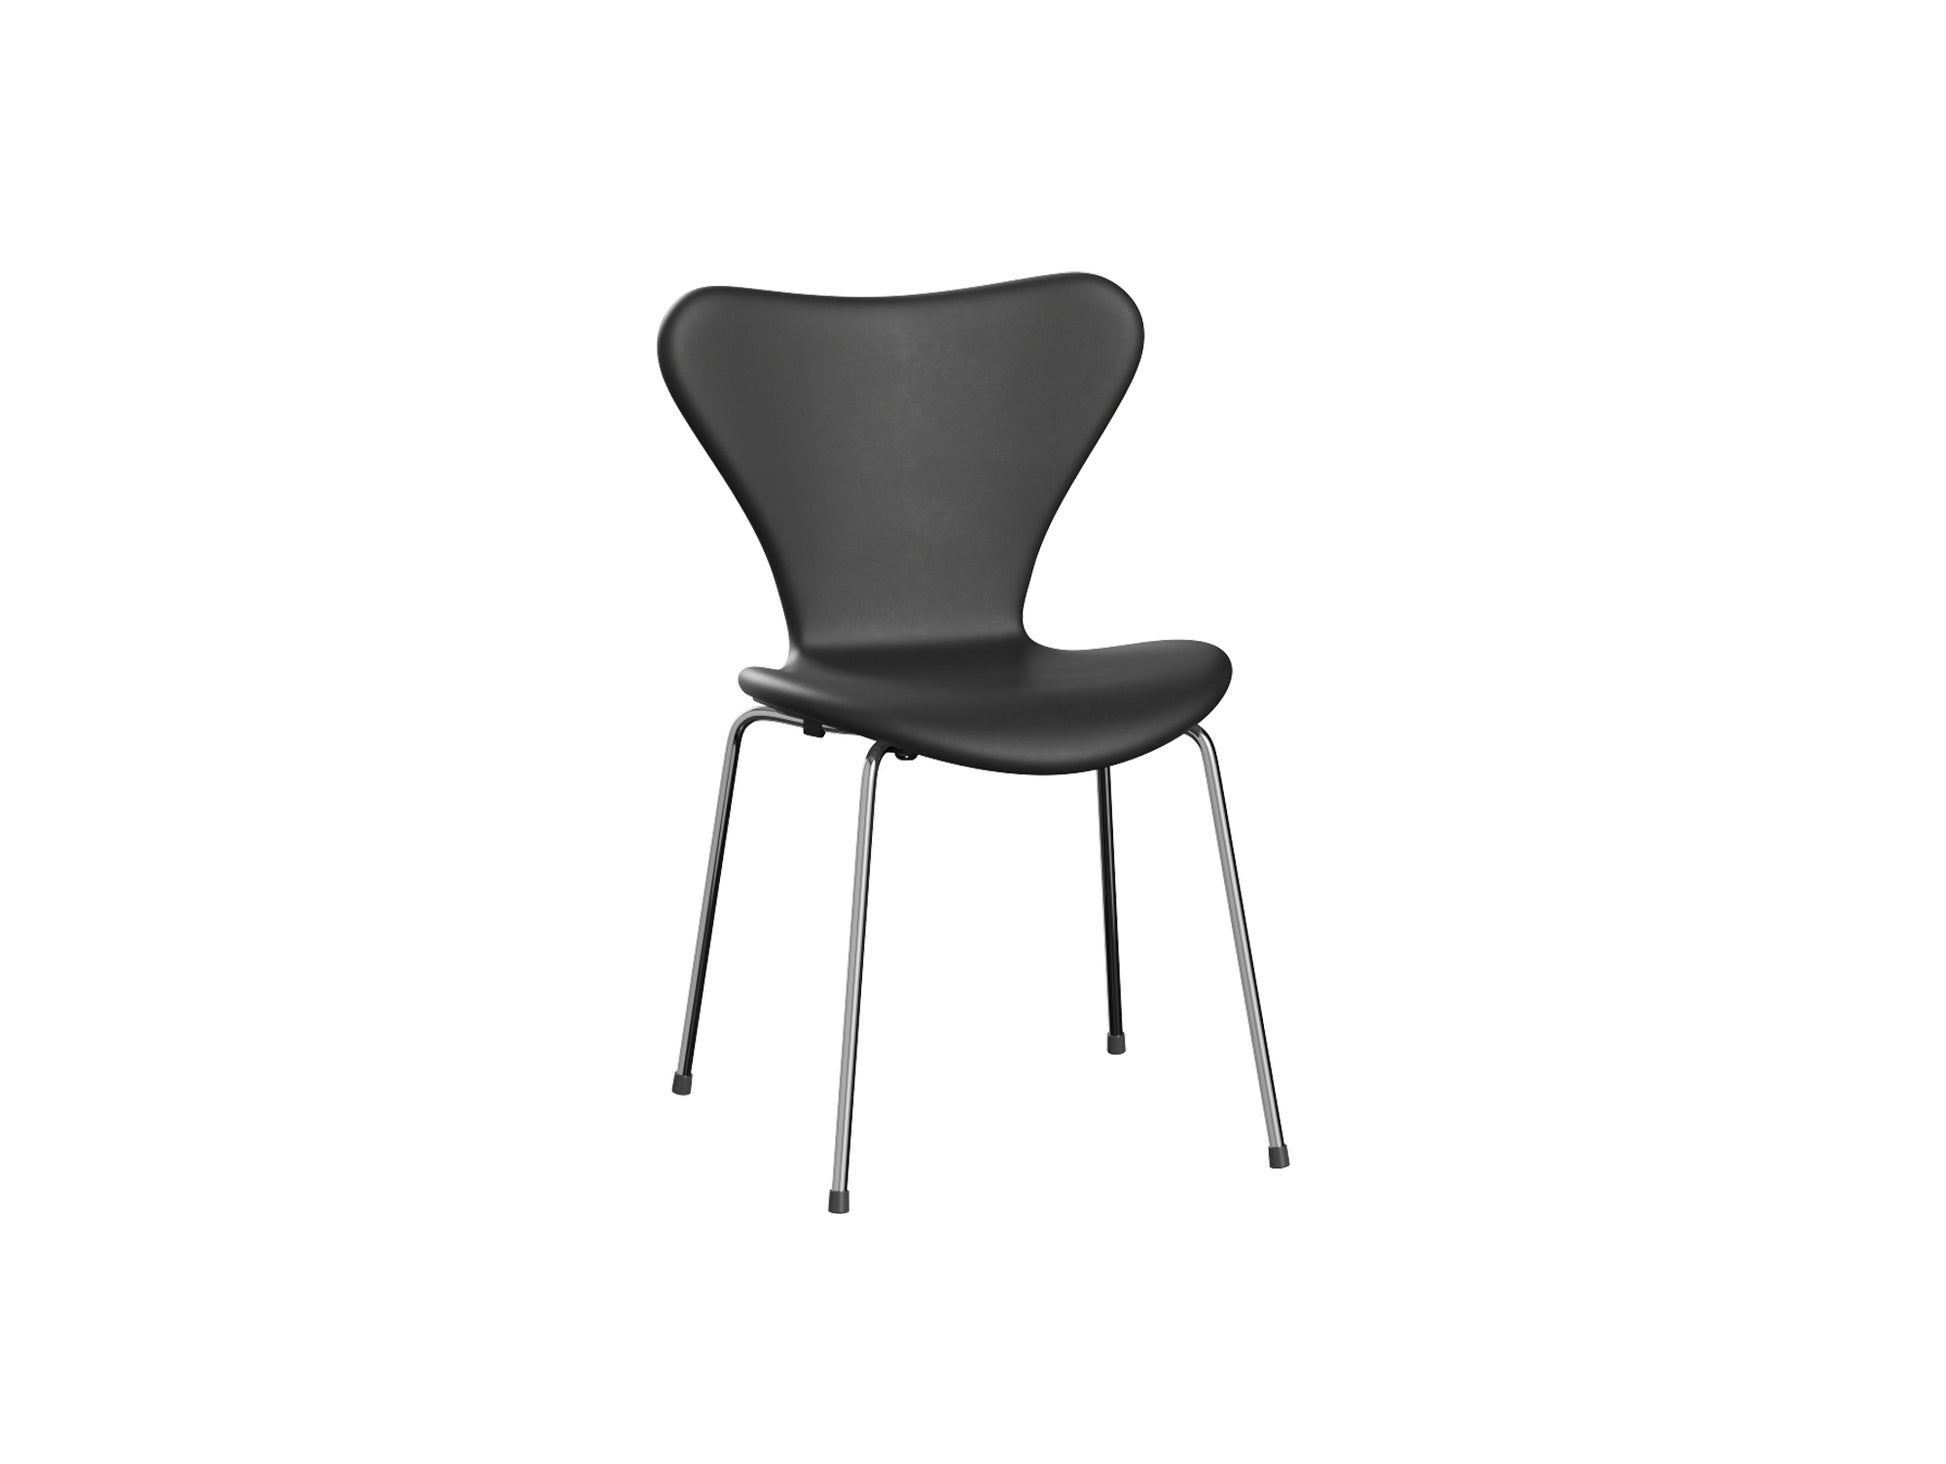 Series 7™ 3107 Dining Chair (Fully Upholstered) by Fritz Hansen - Chromed Steel / Essential Black Leather